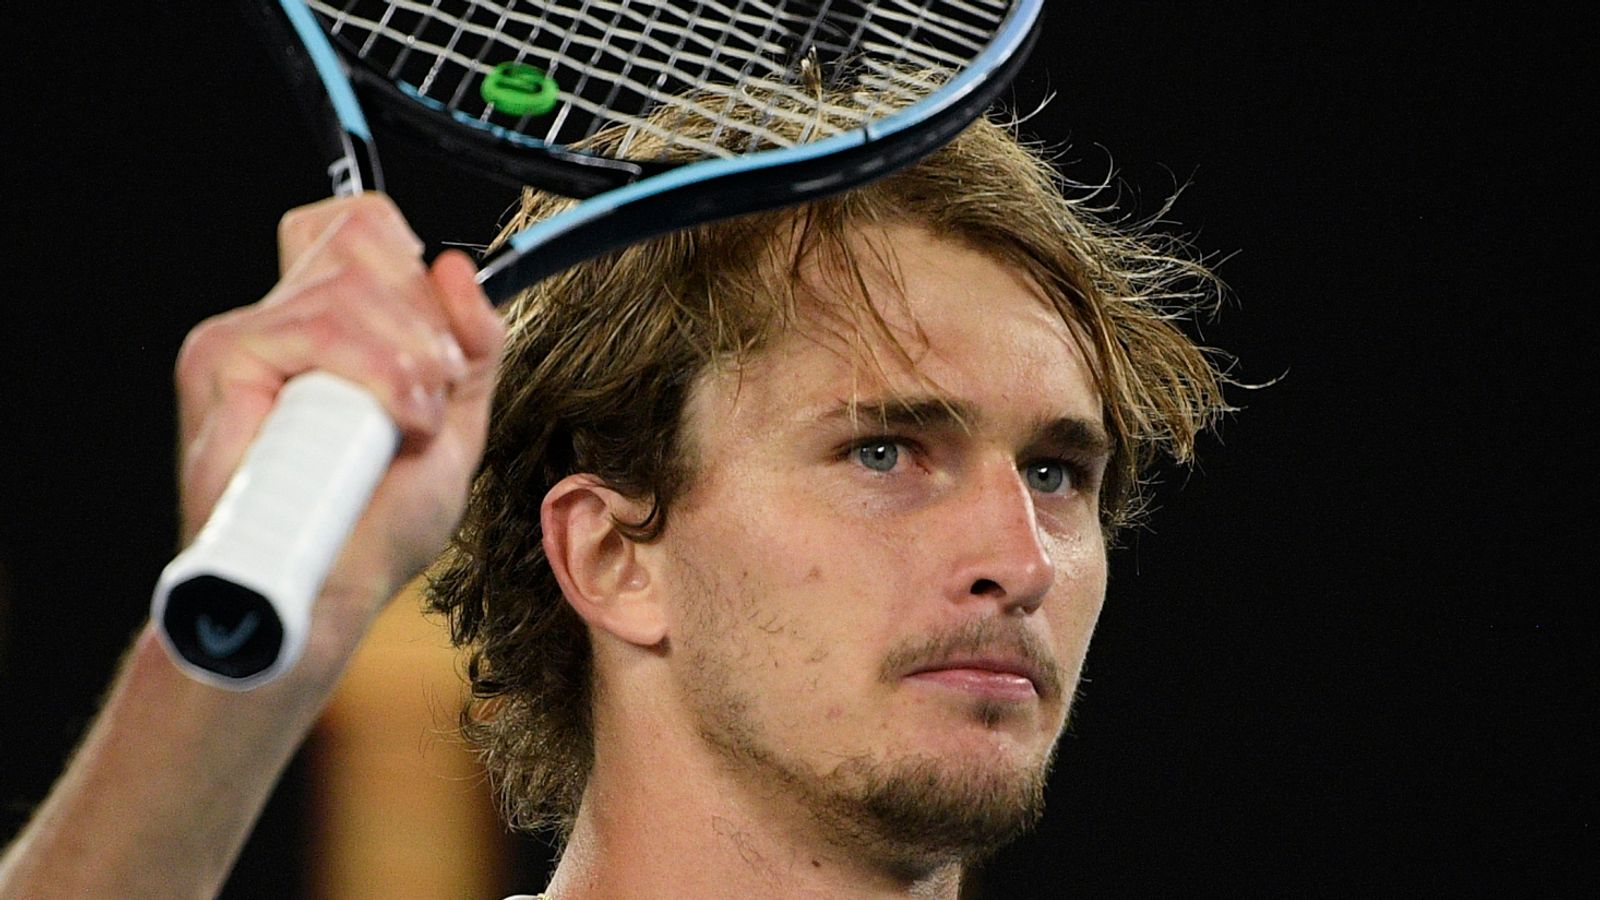 Australian Open: Alexander Zverev suggests possible Covid-19 cases amongst players in Melbourne